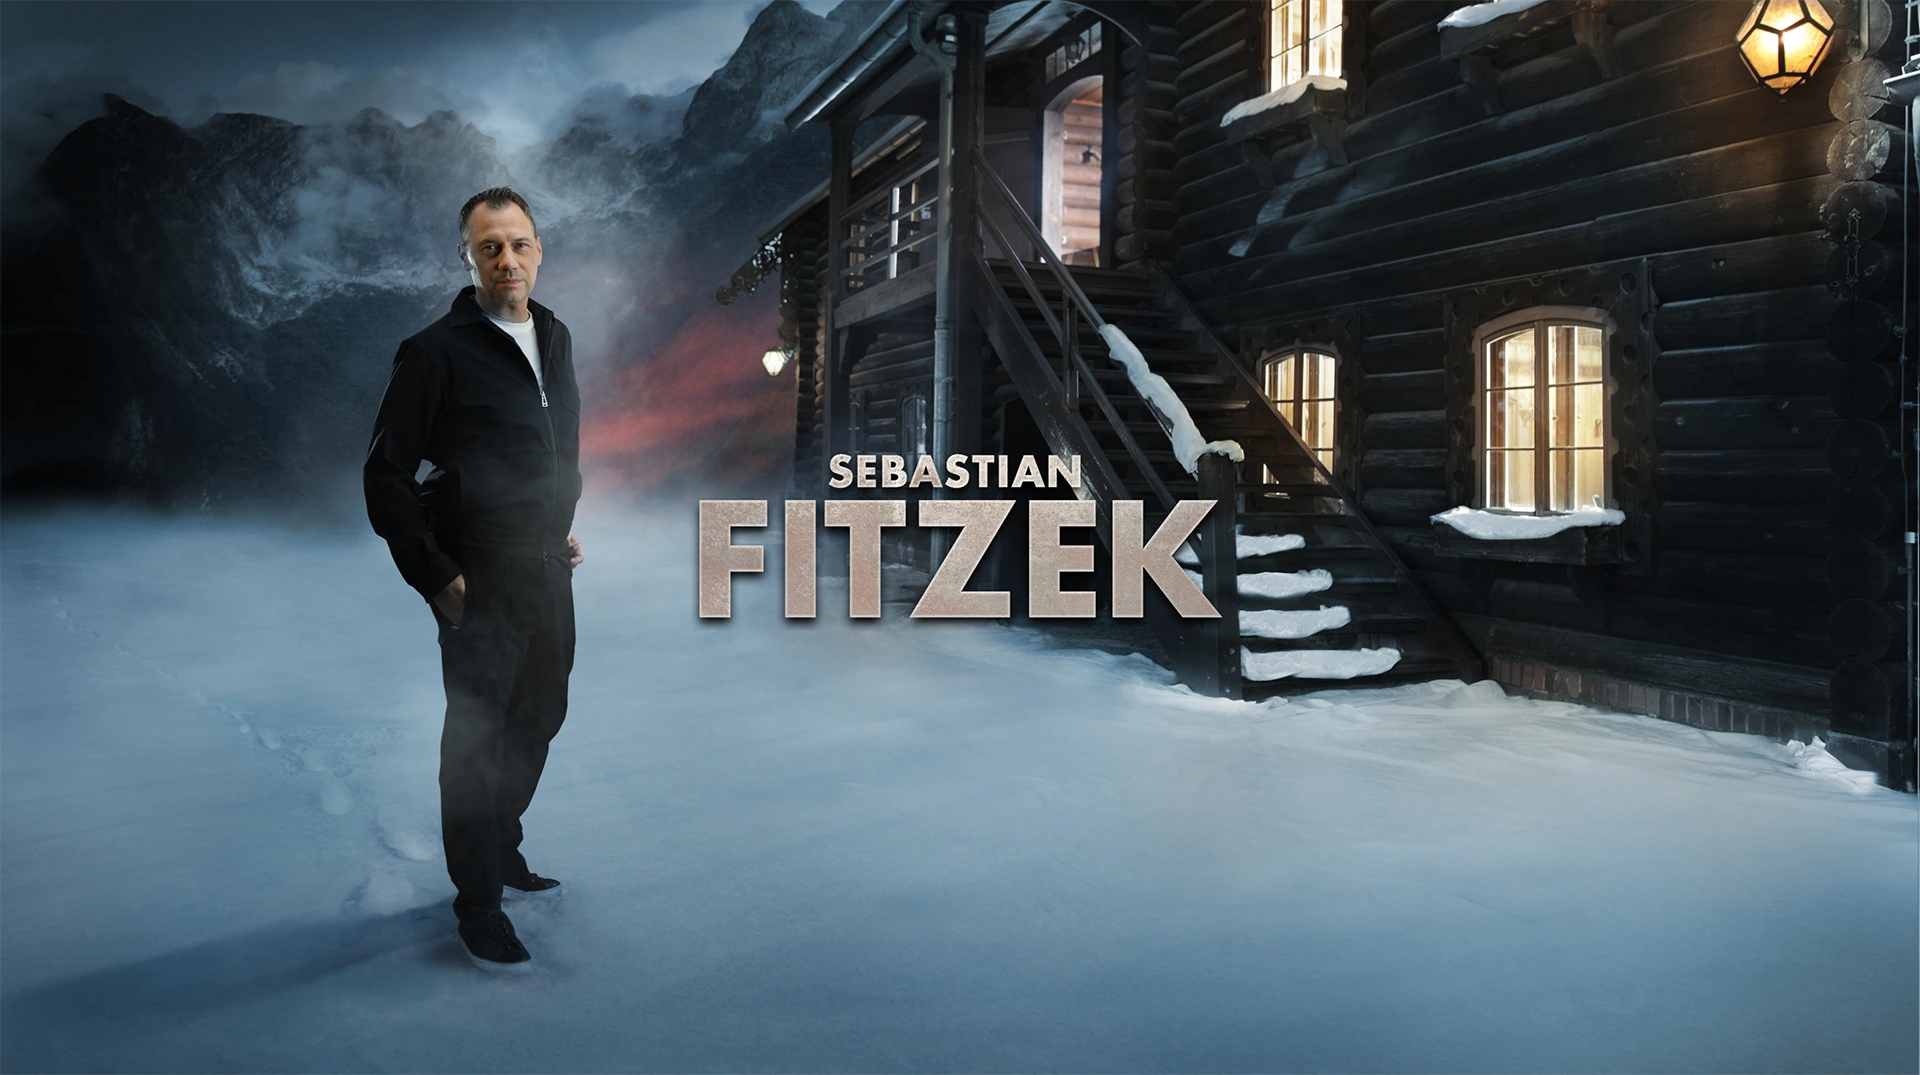 A picture shows the key visual of the book "The Invitation" by Sebastian Fitzek.